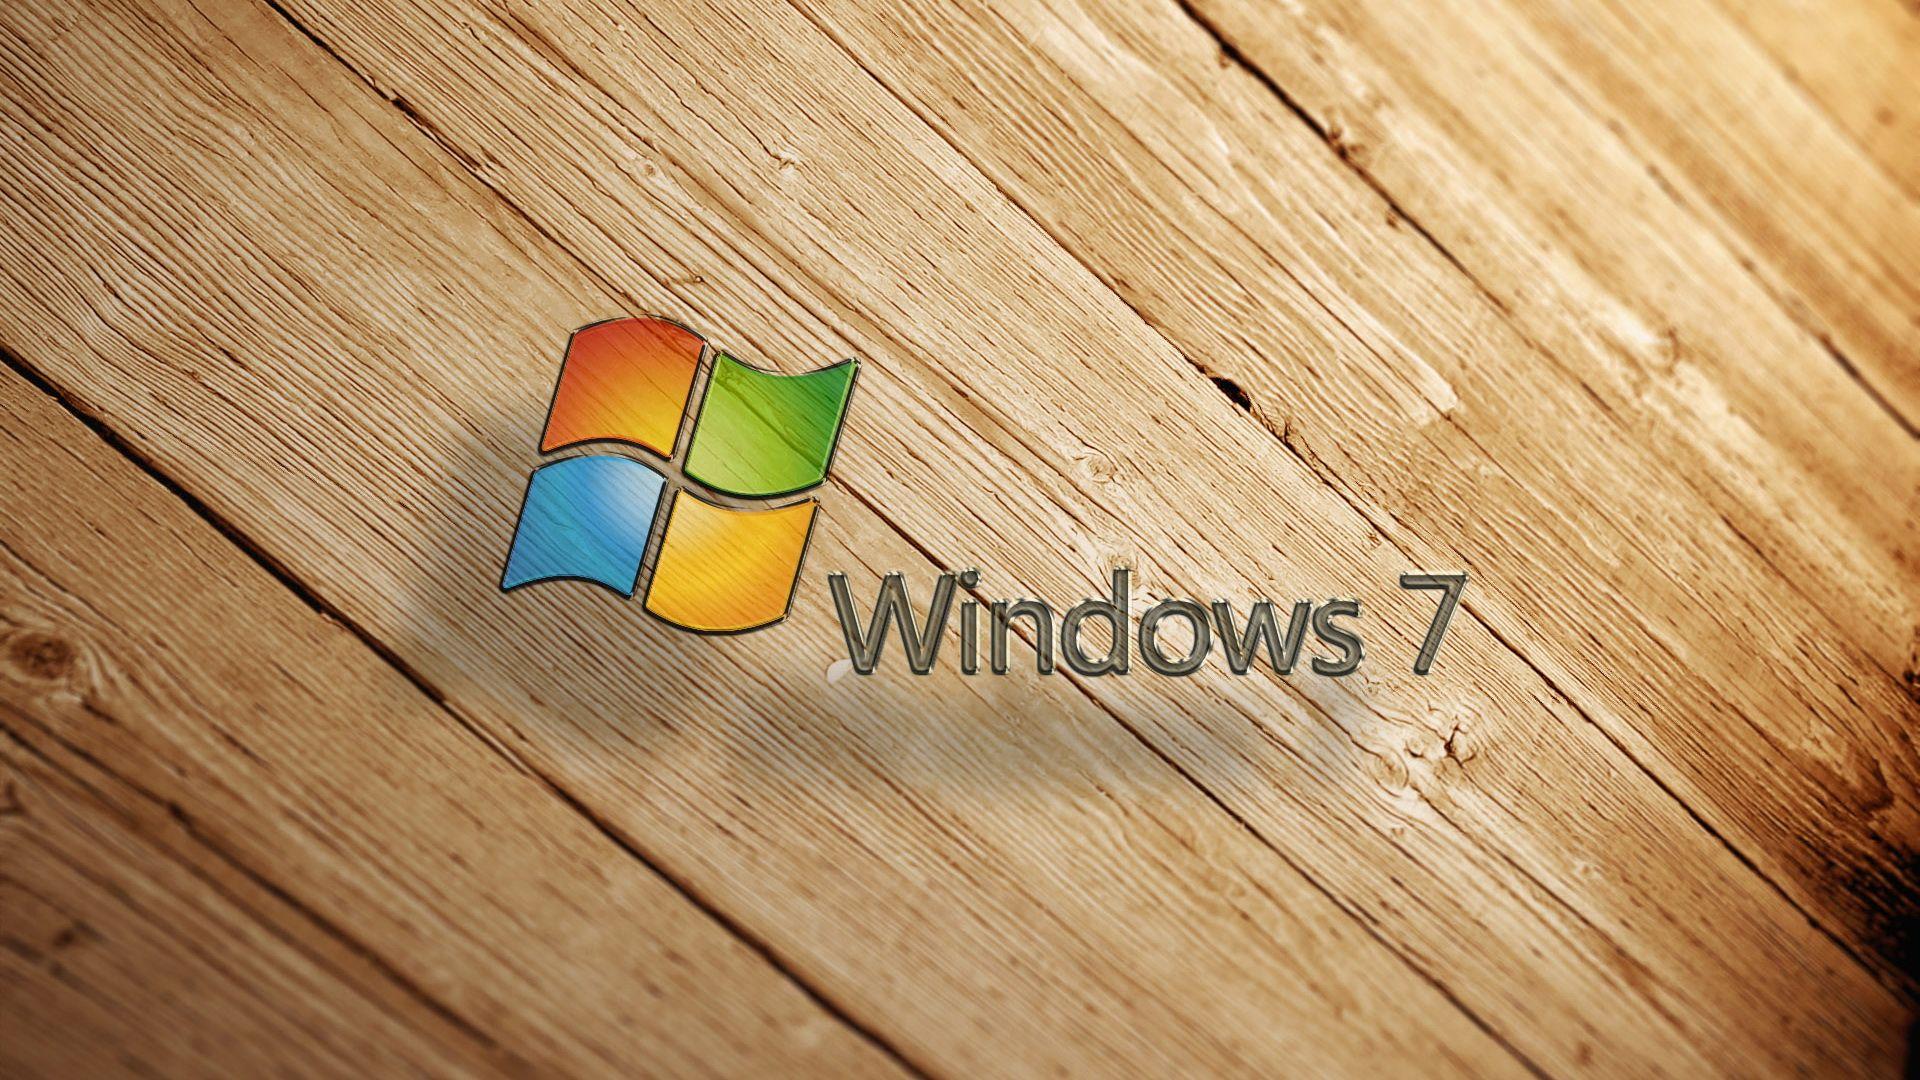 Windows 7 Wood Background HD Picture Wallpaper